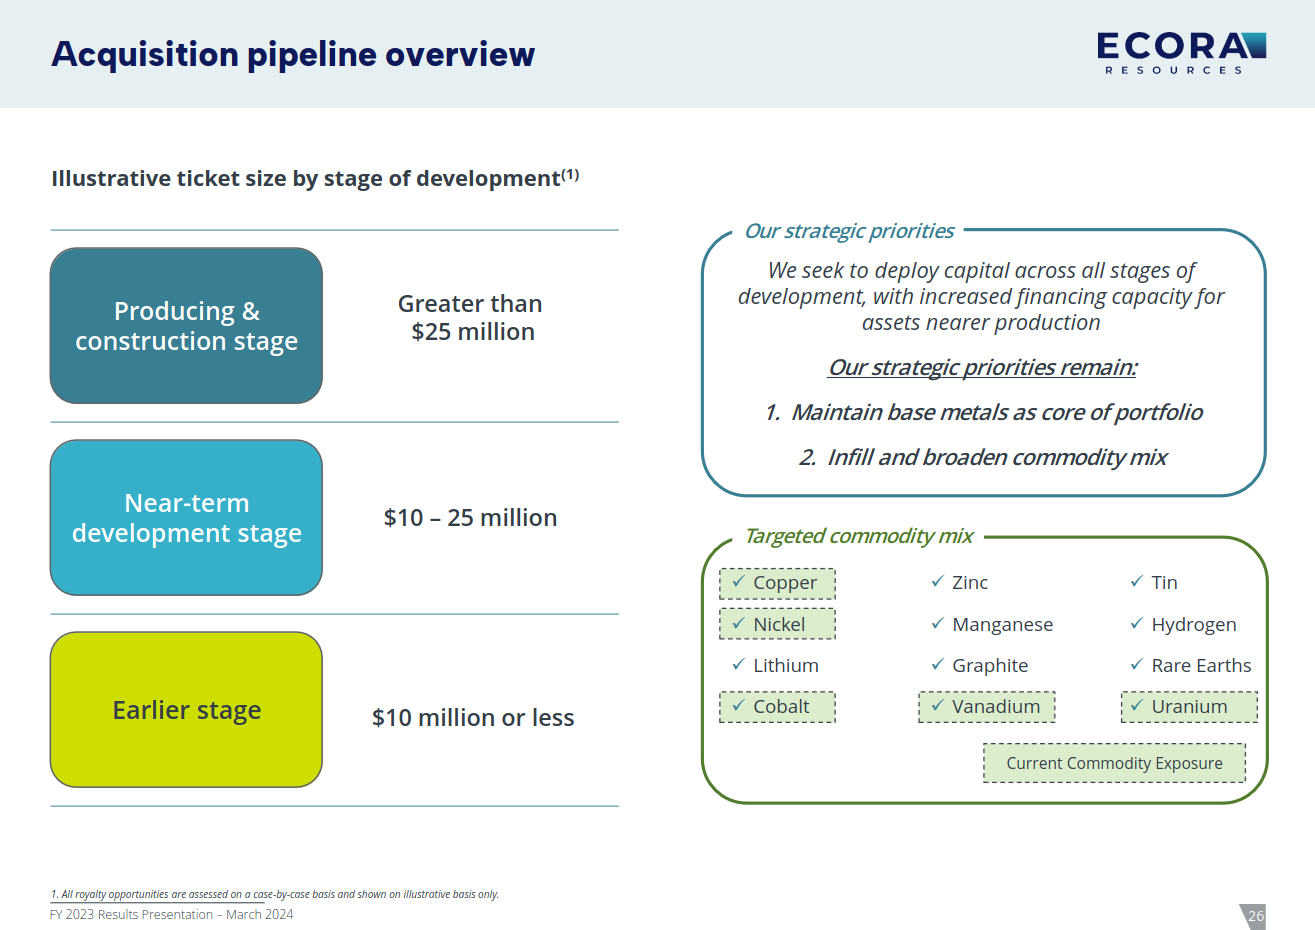 Acquisition criteria - source: FY23 full-year results presentation.